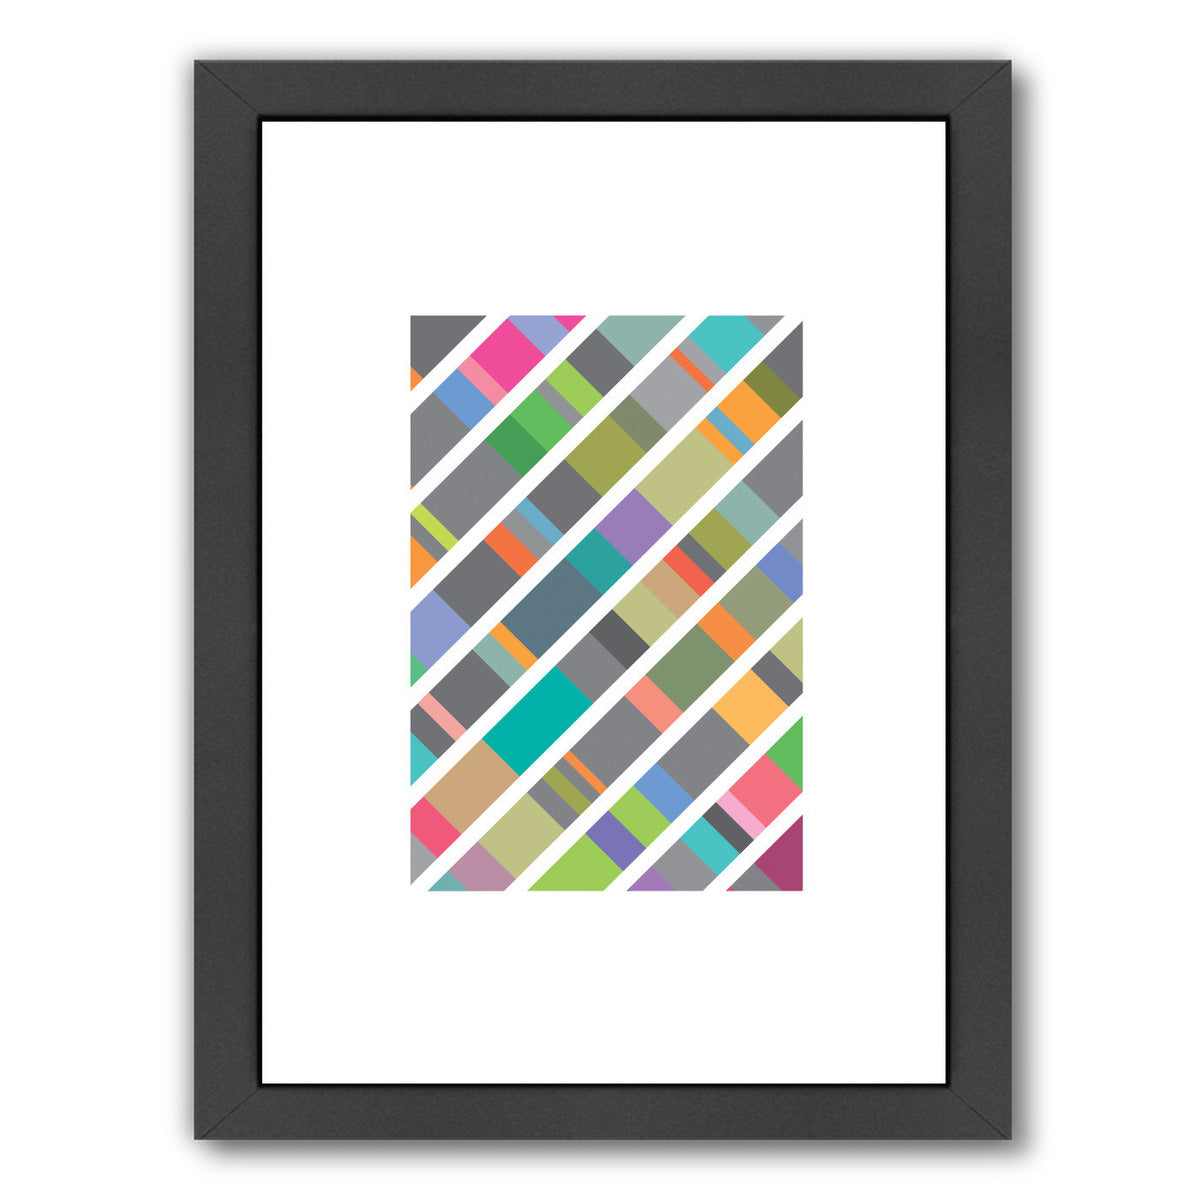 Dna 2 by Visual Philosophy Framed Print - Americanflat